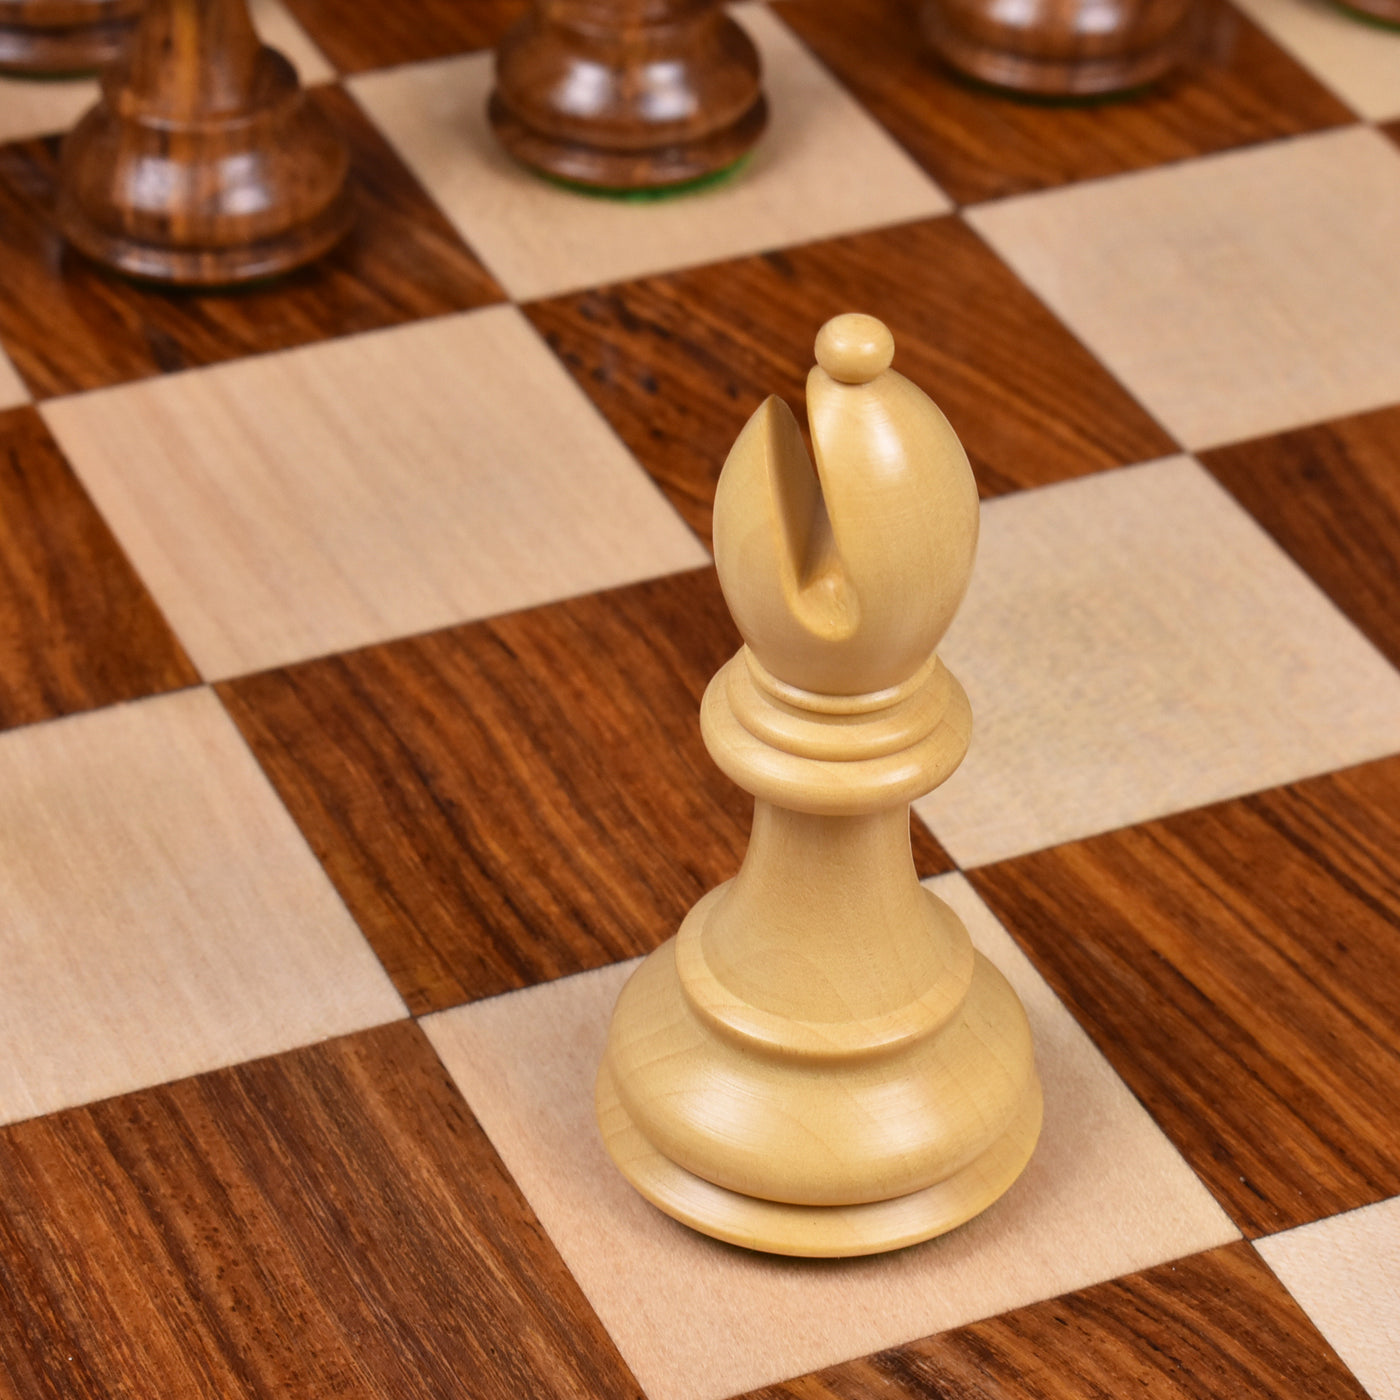 Combo of Golden Rosewood - 3.9" Craftsman Series Staunton Chess Pieces With 21" Drueke Chess board and Leatherette Coffer Storage Box